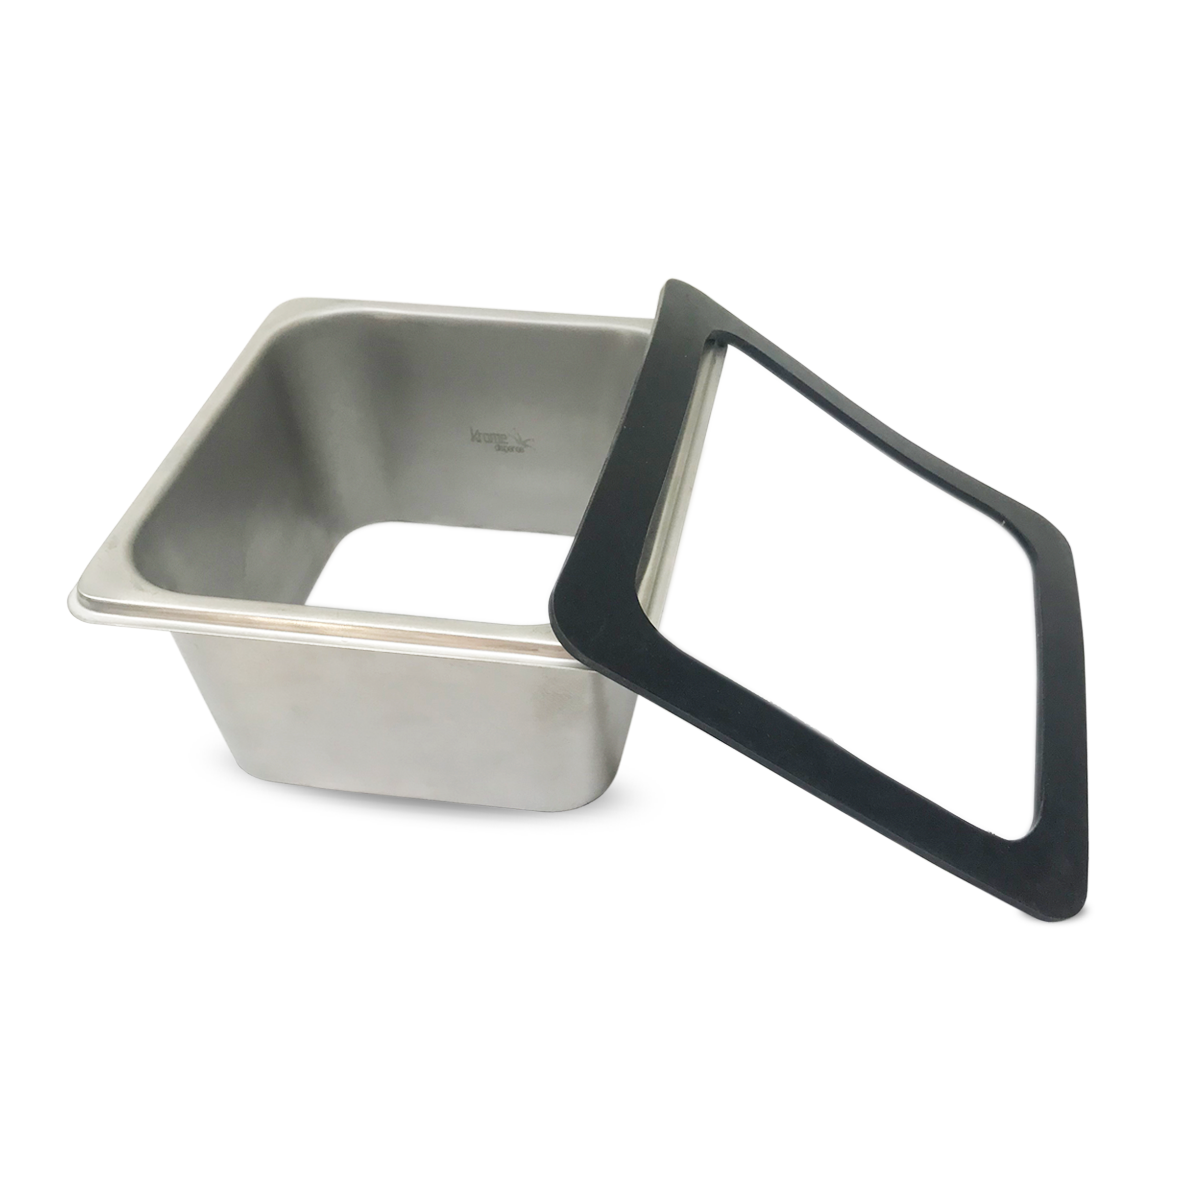 Coffee Knock Drawer/Box,Commercial Use Drawer Type Stainless Steel Coffee Ground Knock Container Bucket Box with Rod Approx 3200g White 